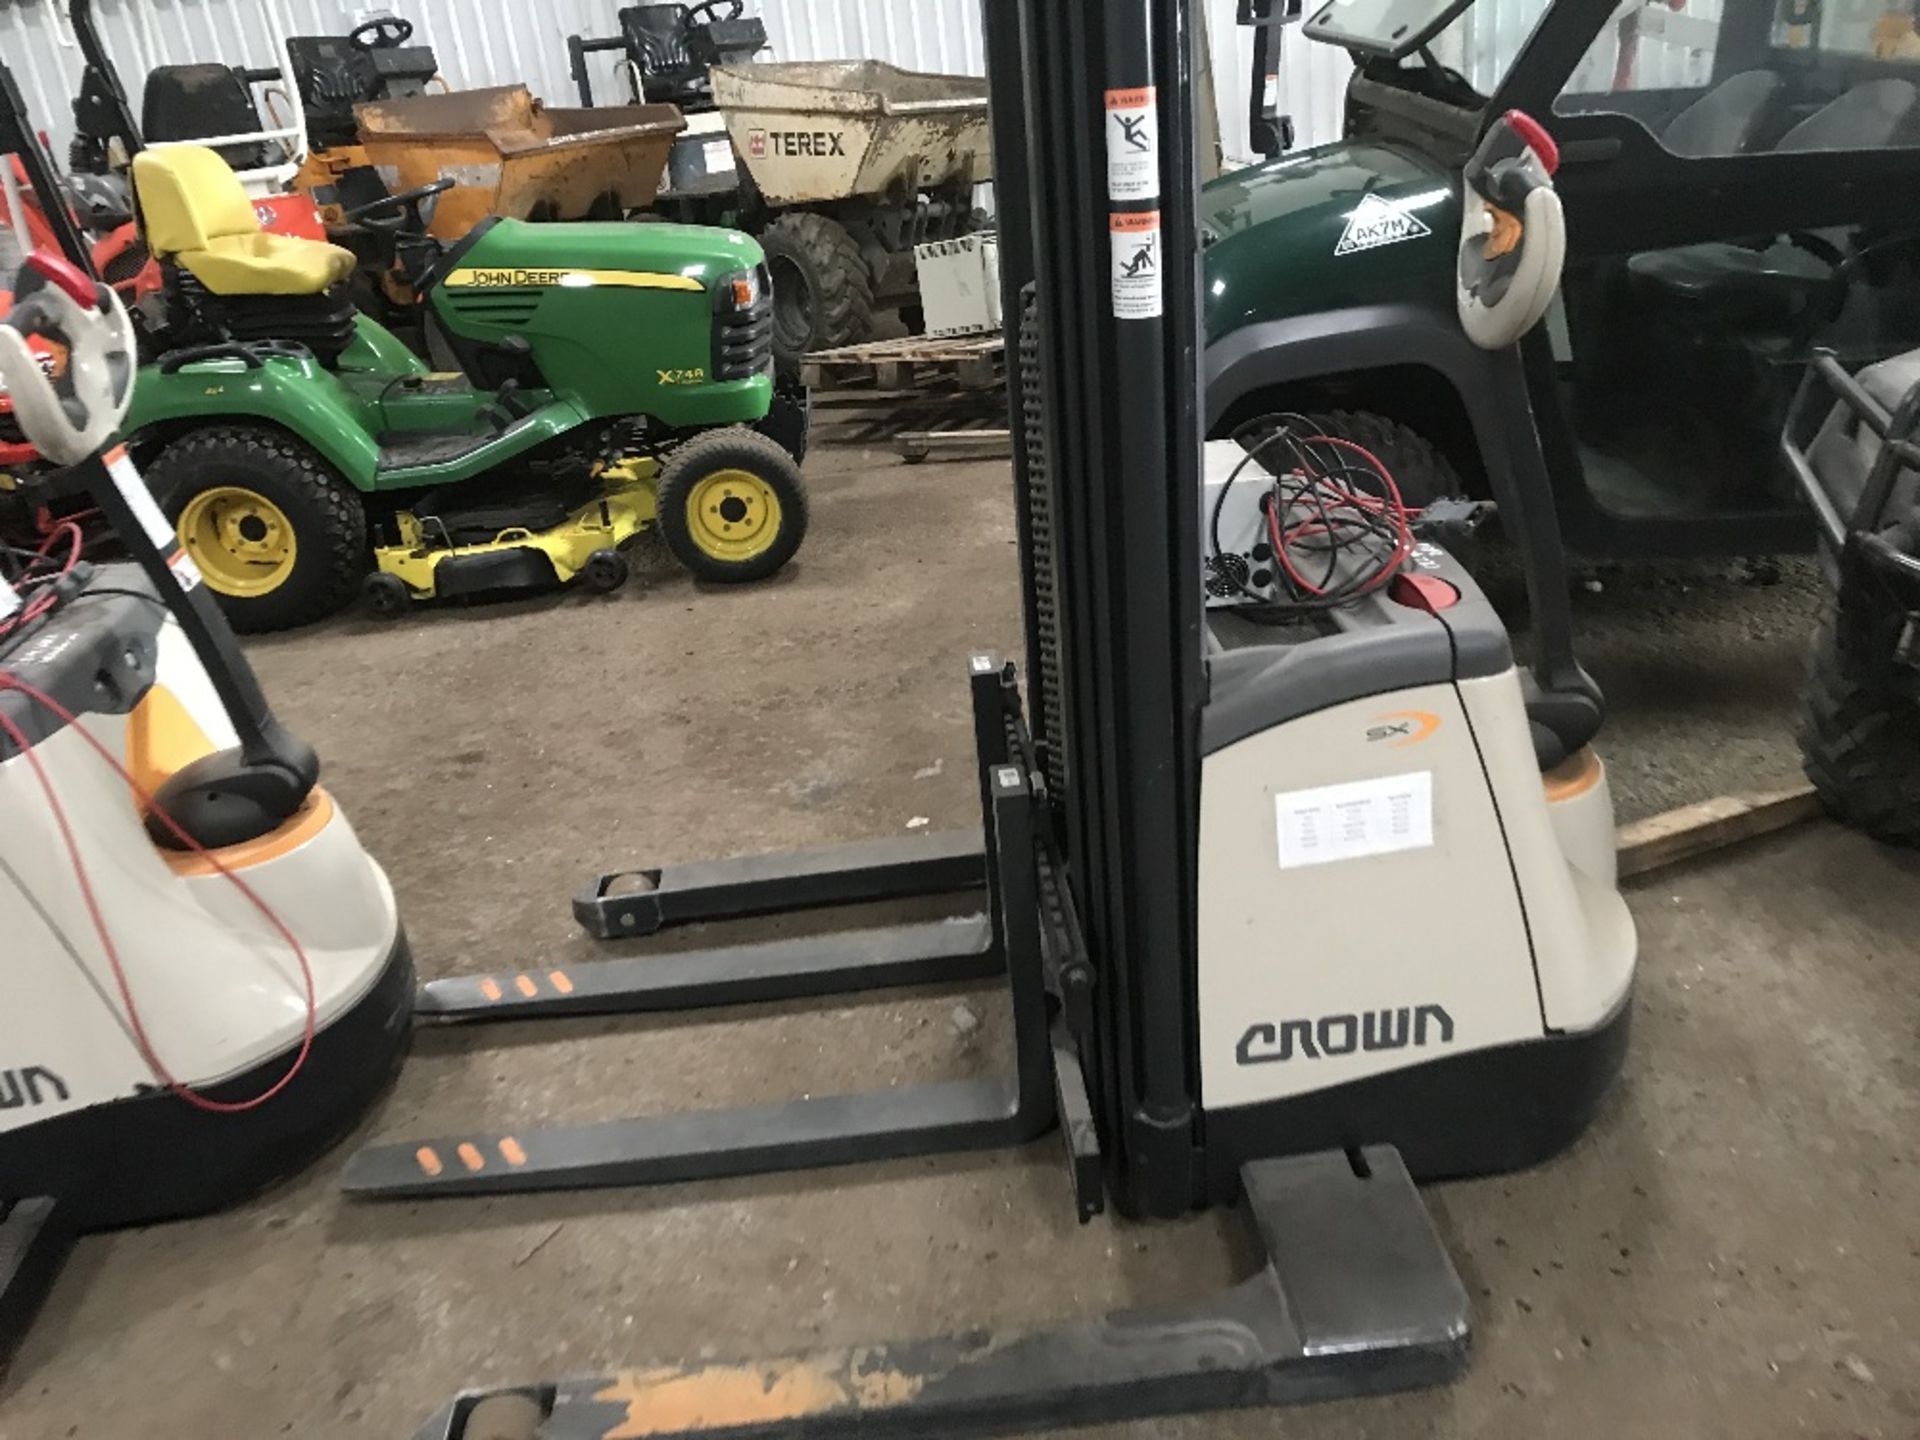 CROWN SX WAREHOUSE BATTERY PEDESTRIAN FORKLIFT TRUCK, YEAR 2016 BUILD, WITH CHARGER, 122NO REC